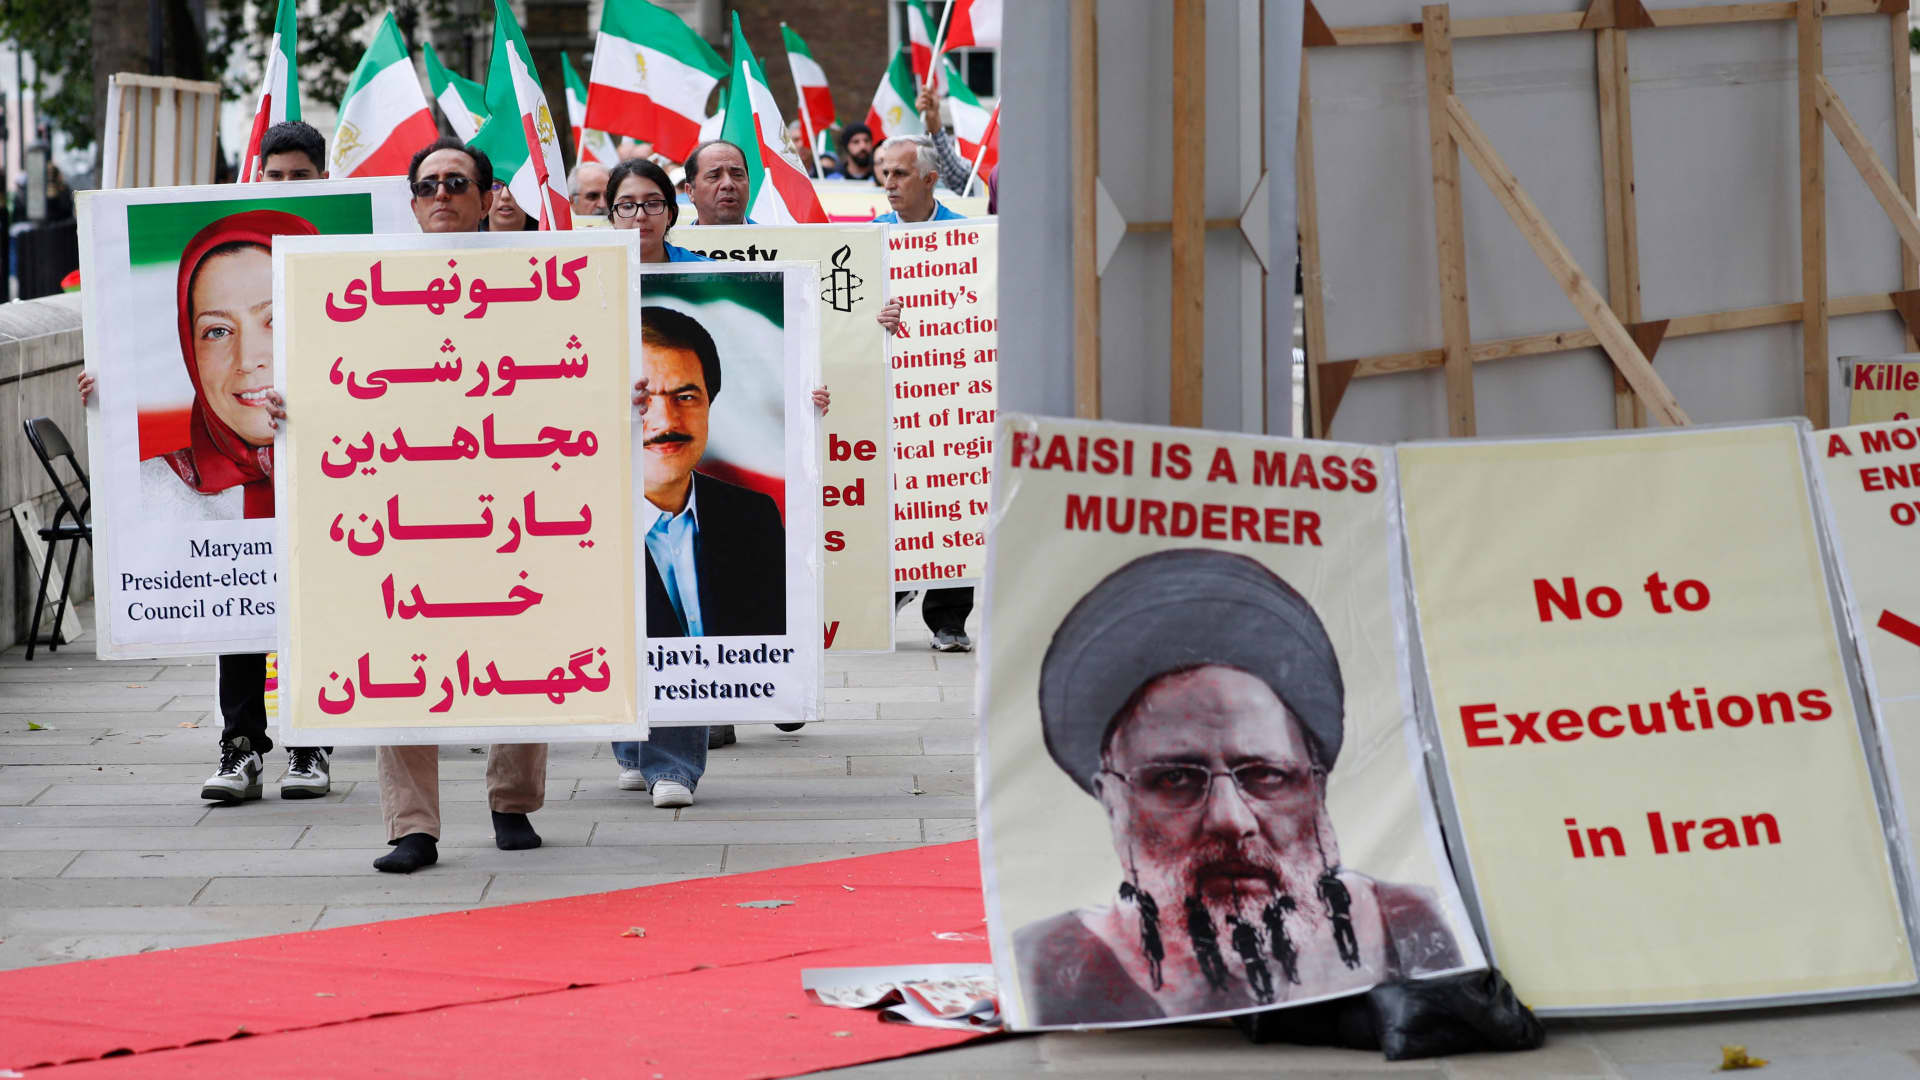 Protesters carry banners during a demonstration organized by supporters of the National Council of Resistance of Iran (NCRI) to protest against the inauguration of Iran's new president Ebrahim Raisi outside Downing Street in central London on August 5, 2021. Raisi is accused of being responsible for the mass execution of thousands of NCRI members in 1988.